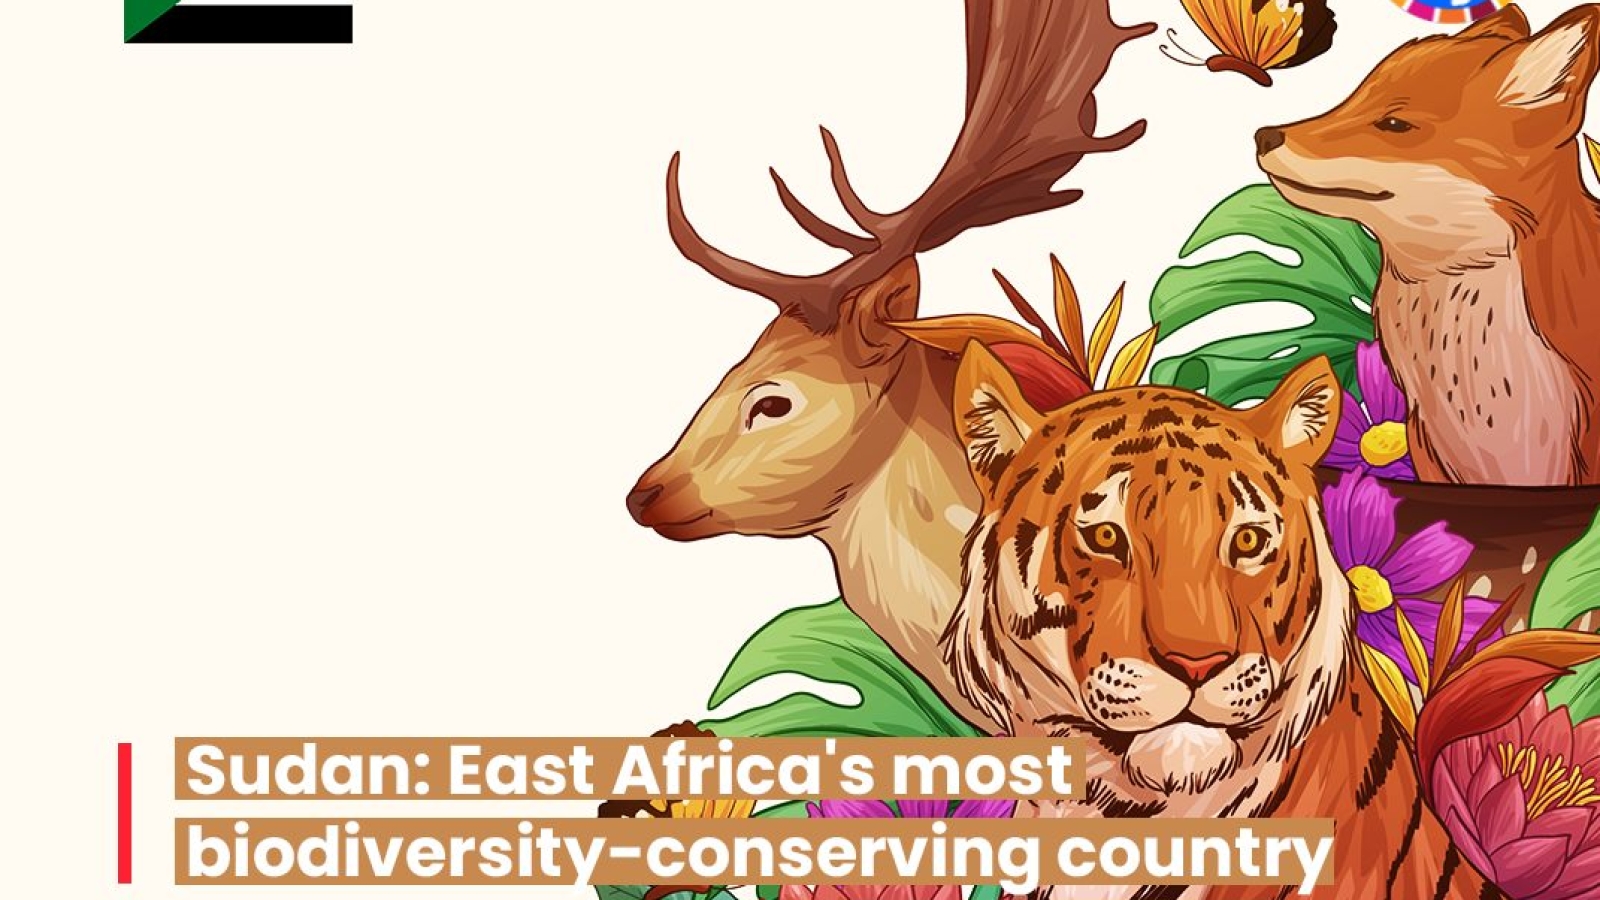 Sudan-East Africa's most biodiversity-conserving country